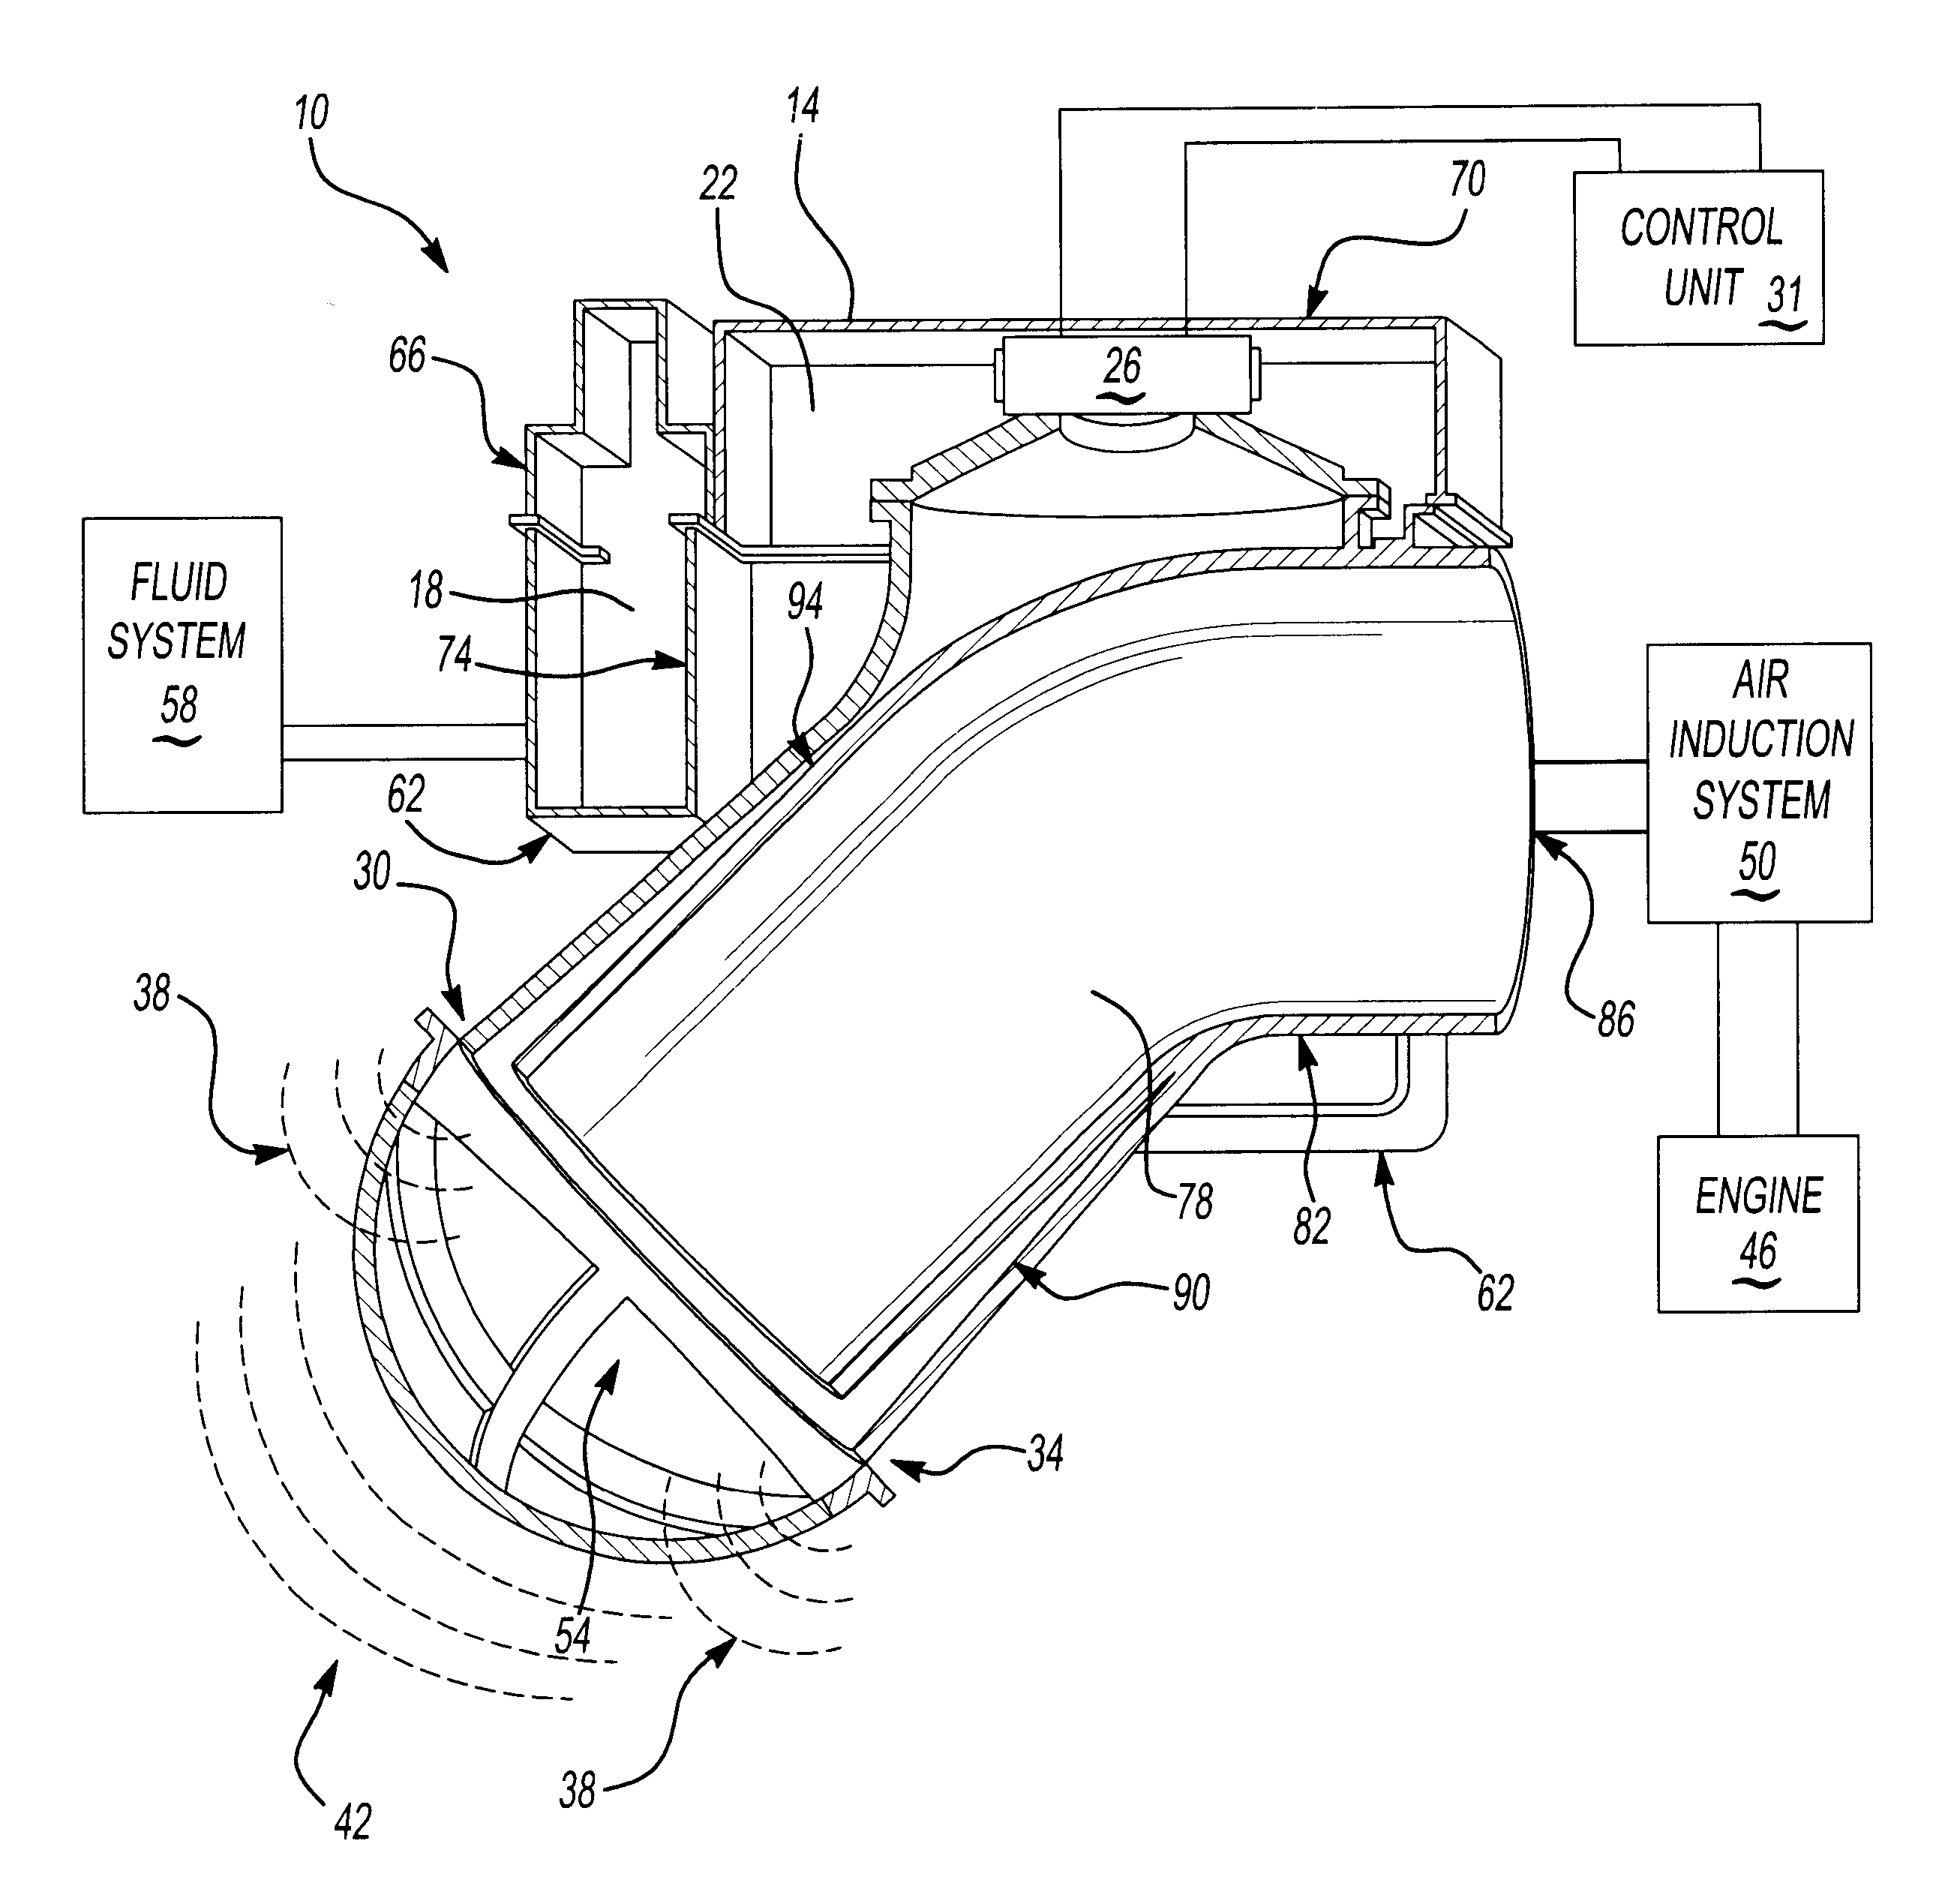 Integrated active noise attenuation system and fluid reservoir